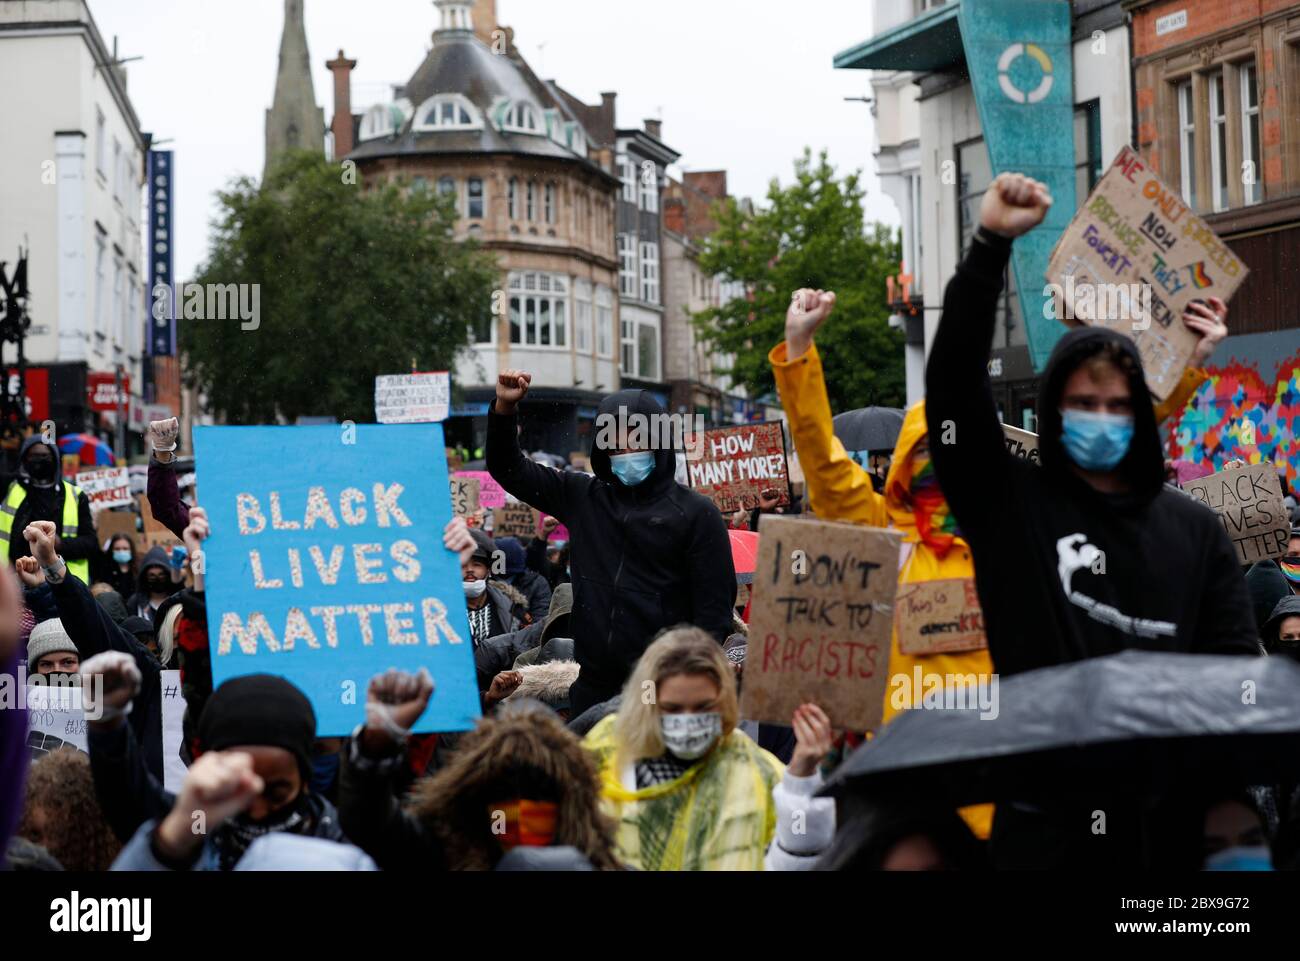 Leicester, Leicestershire, UK. 6th June 2020. Protesters take the knee during a 'Black lives matter' demonstration following the death of American George Floyd while in the custody of Minneapolis police. Credit Darren Staples/Alamy Live News. Stock Photo